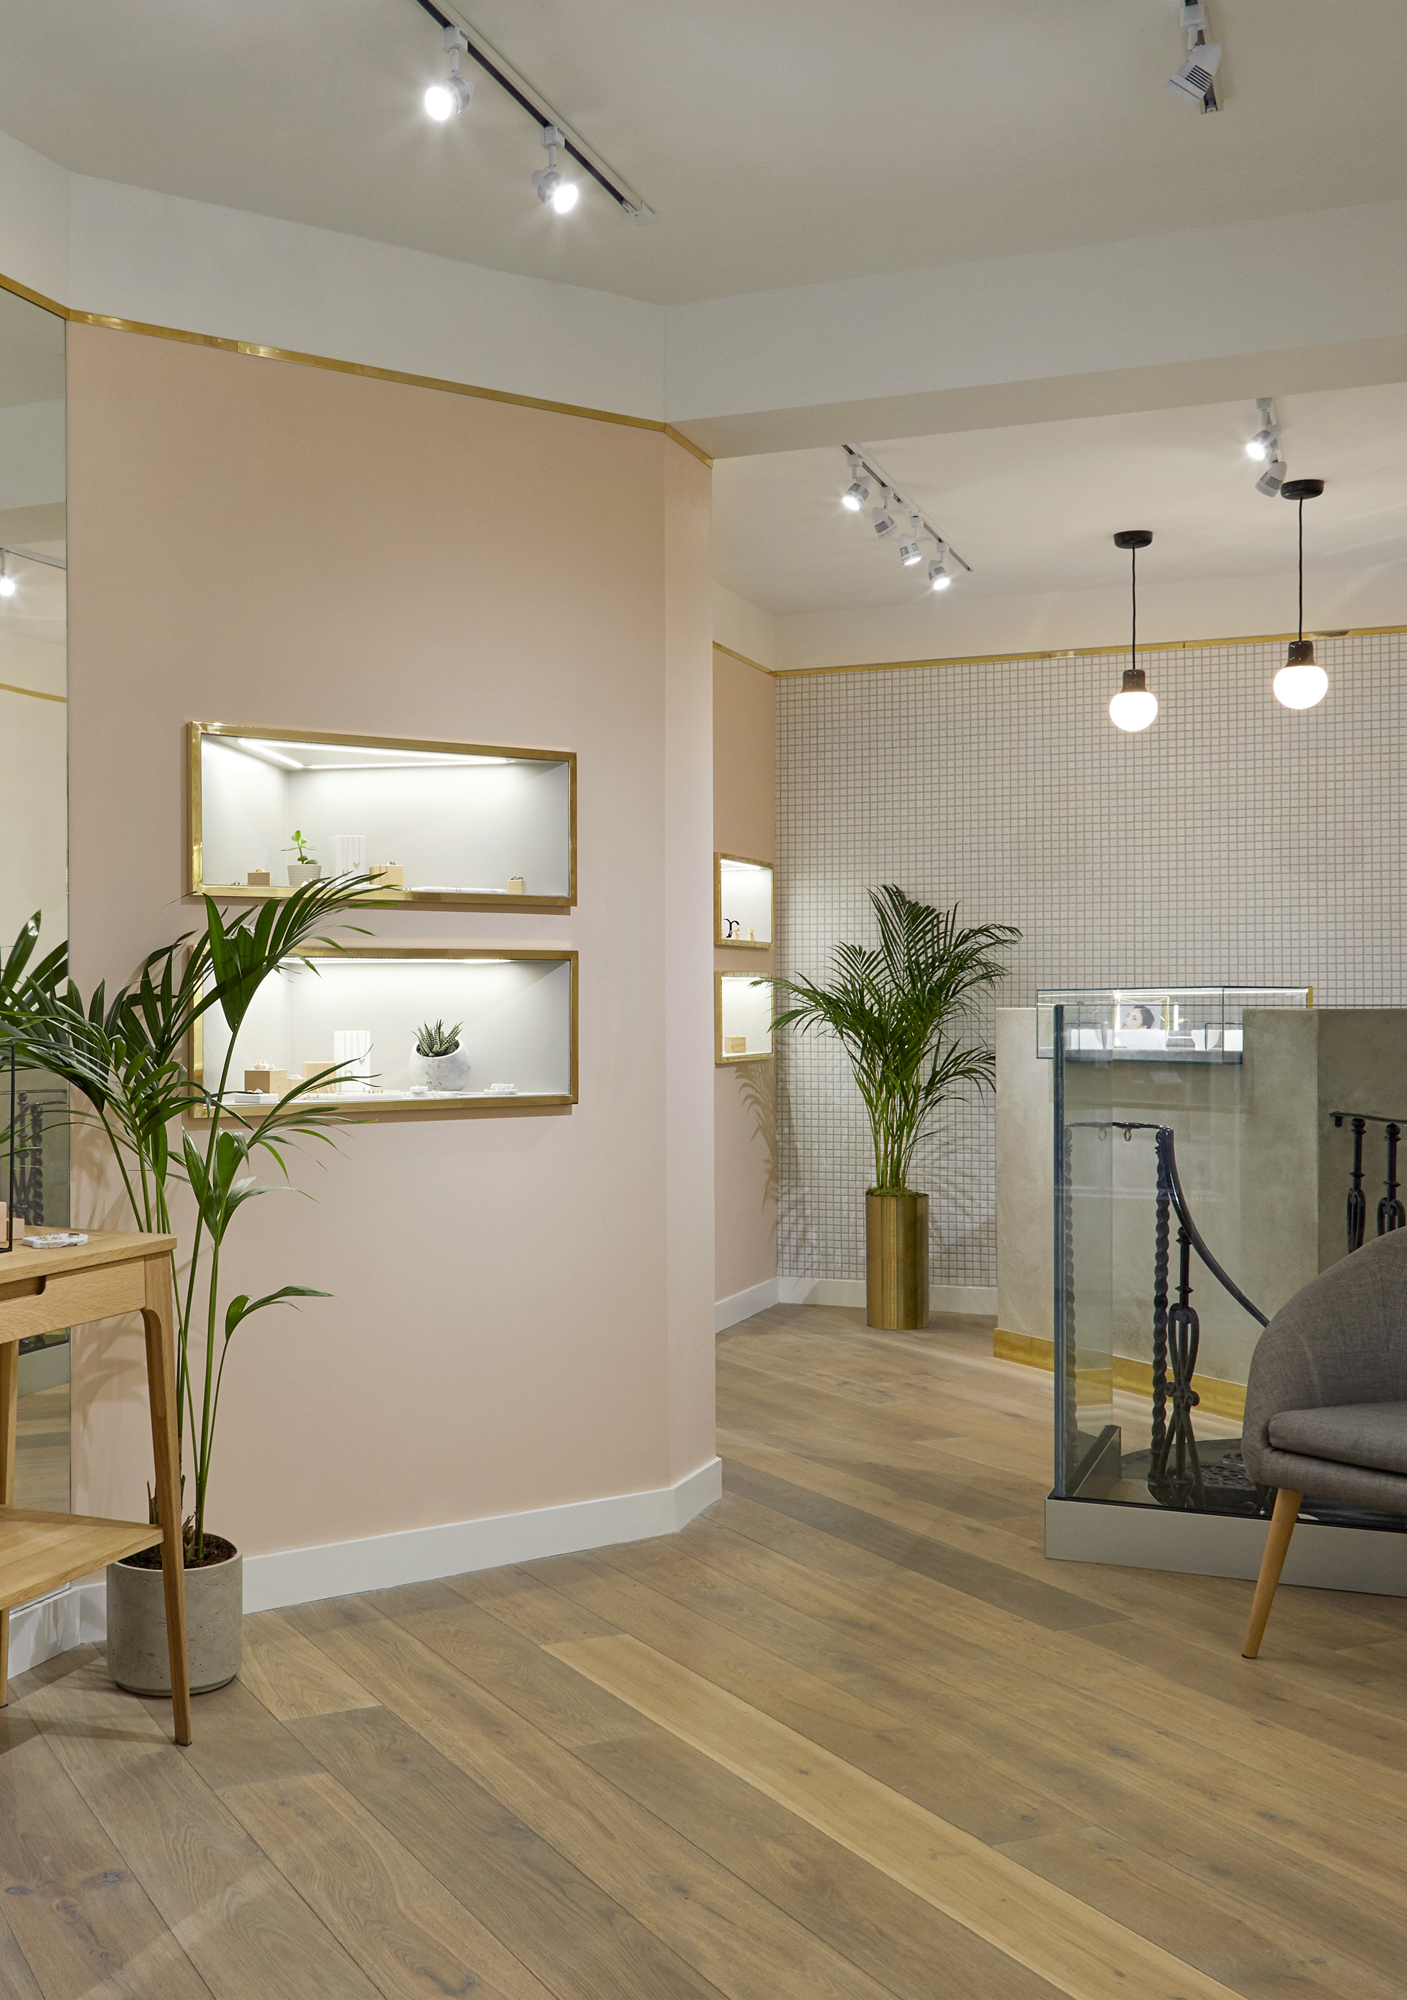 House of Sylphina commercial interior design for Astrid and Miyu flagship, London.